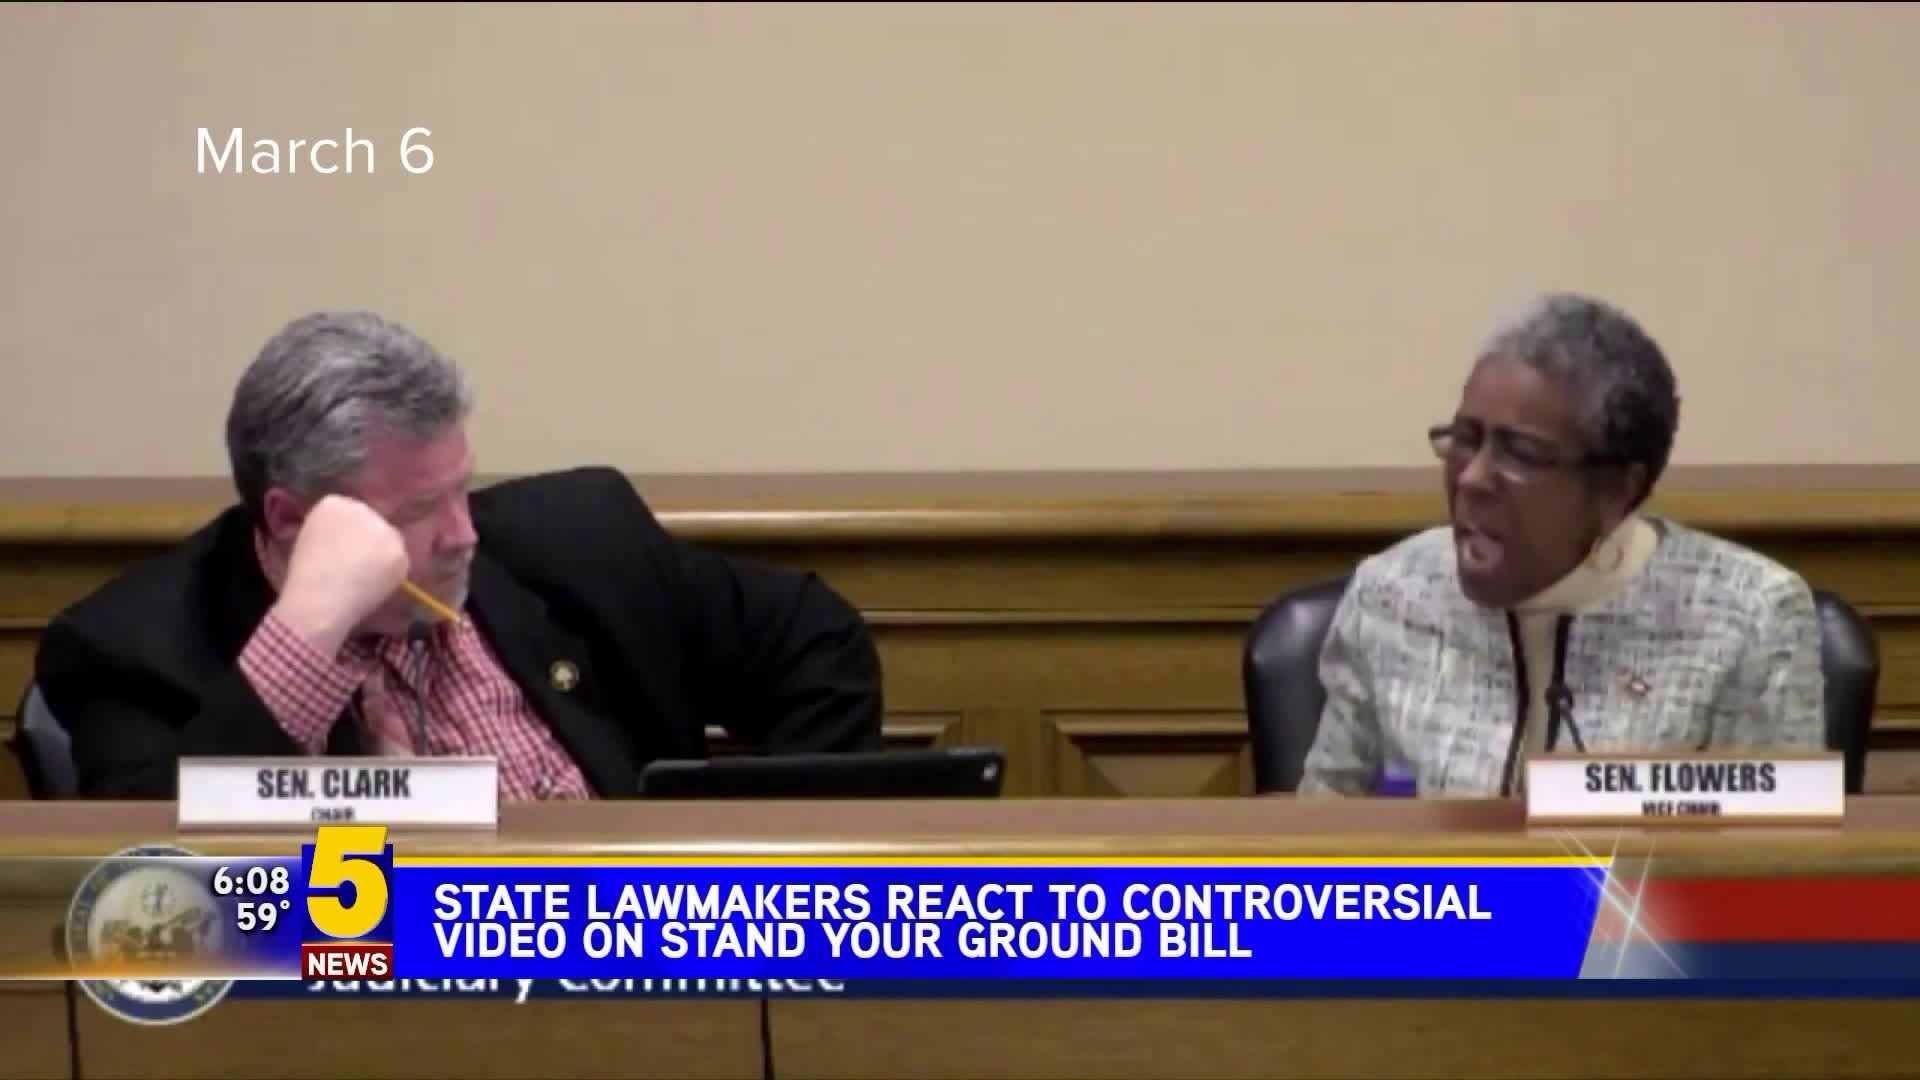 State Lawmakers React To Controversial Video On Stand Your Ground Bill